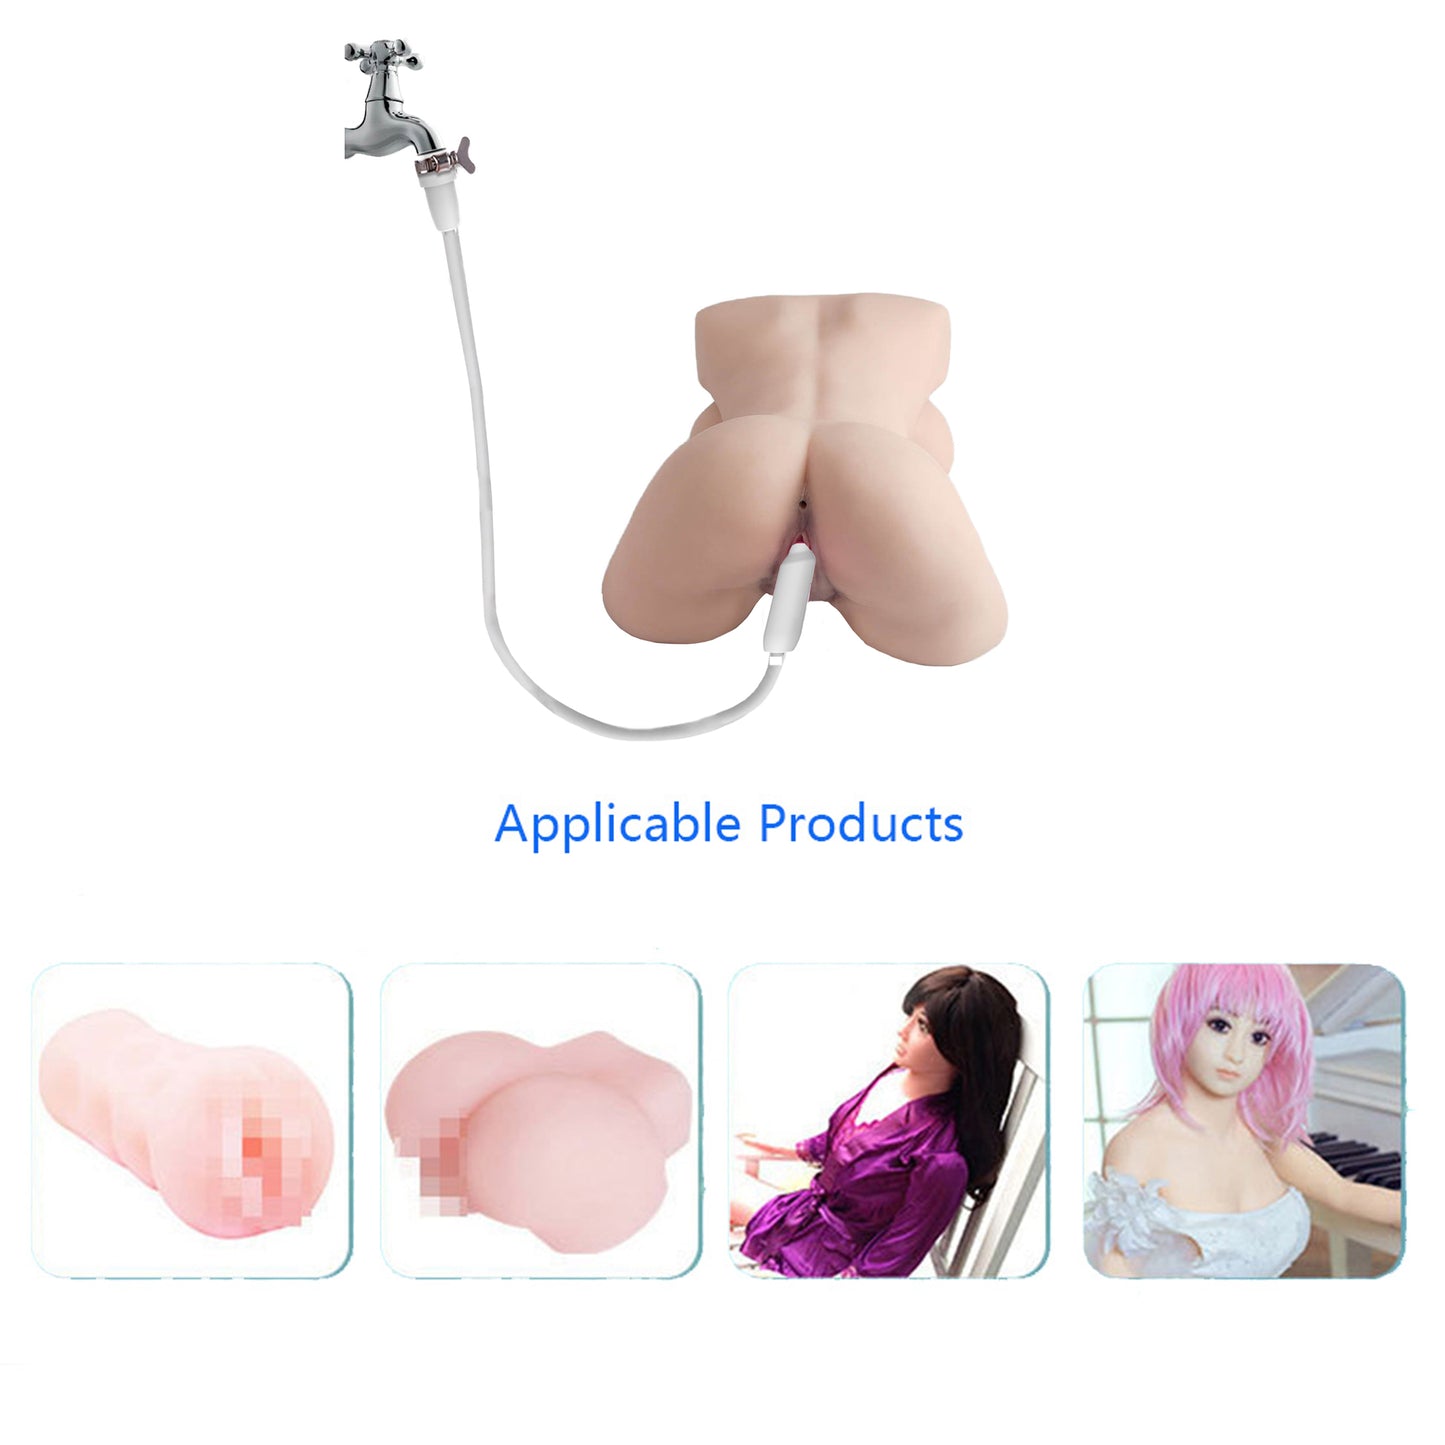 Douche Washer Hose for Male Masturbator Pocket Pussy Cleaning Device Tool